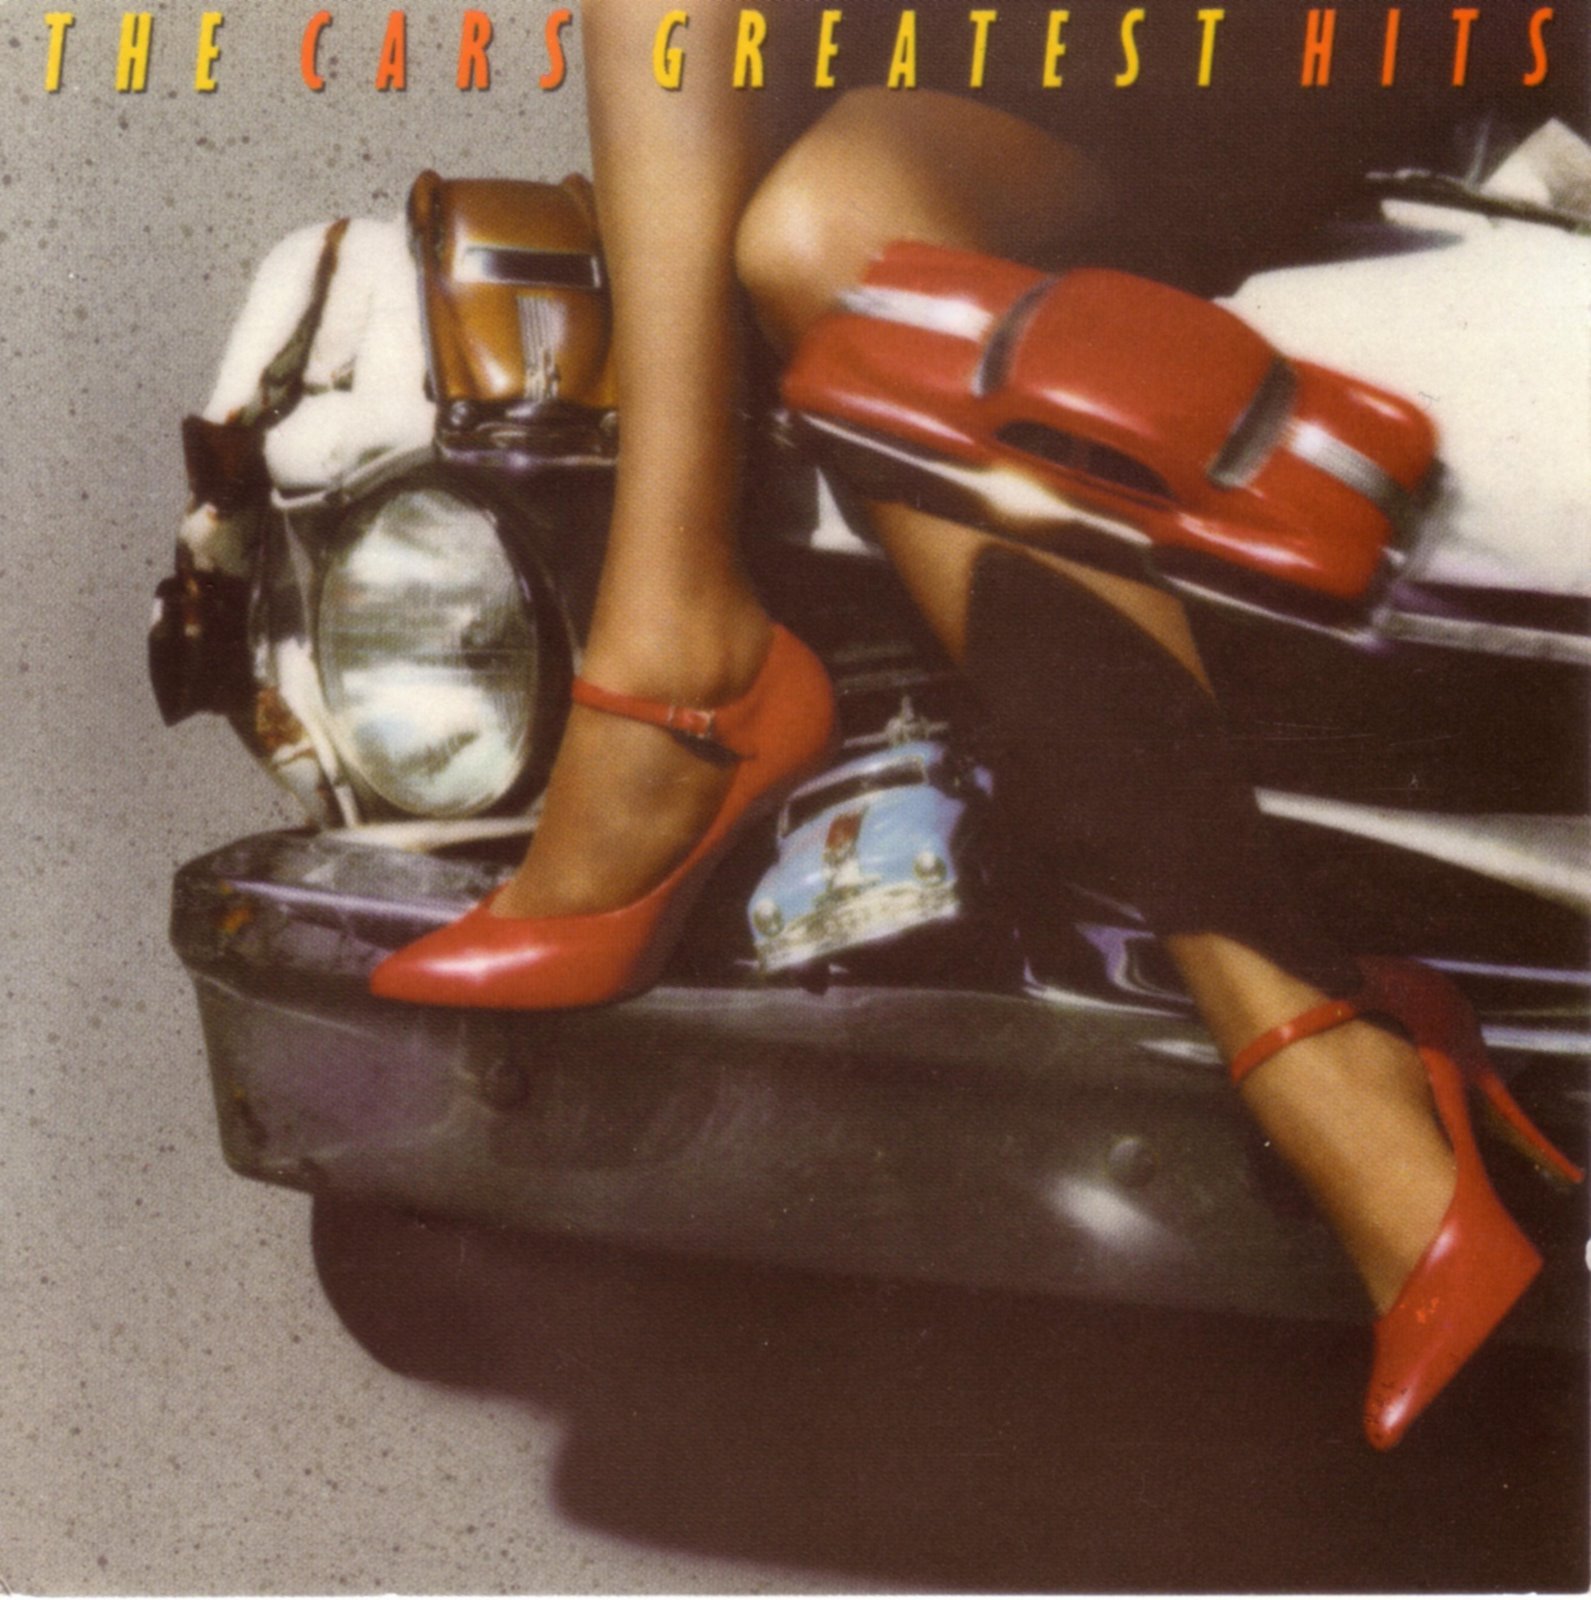 [[AllCDCovers]_the_cars_greatest_hits_2005_retail_cd-front.jpg]